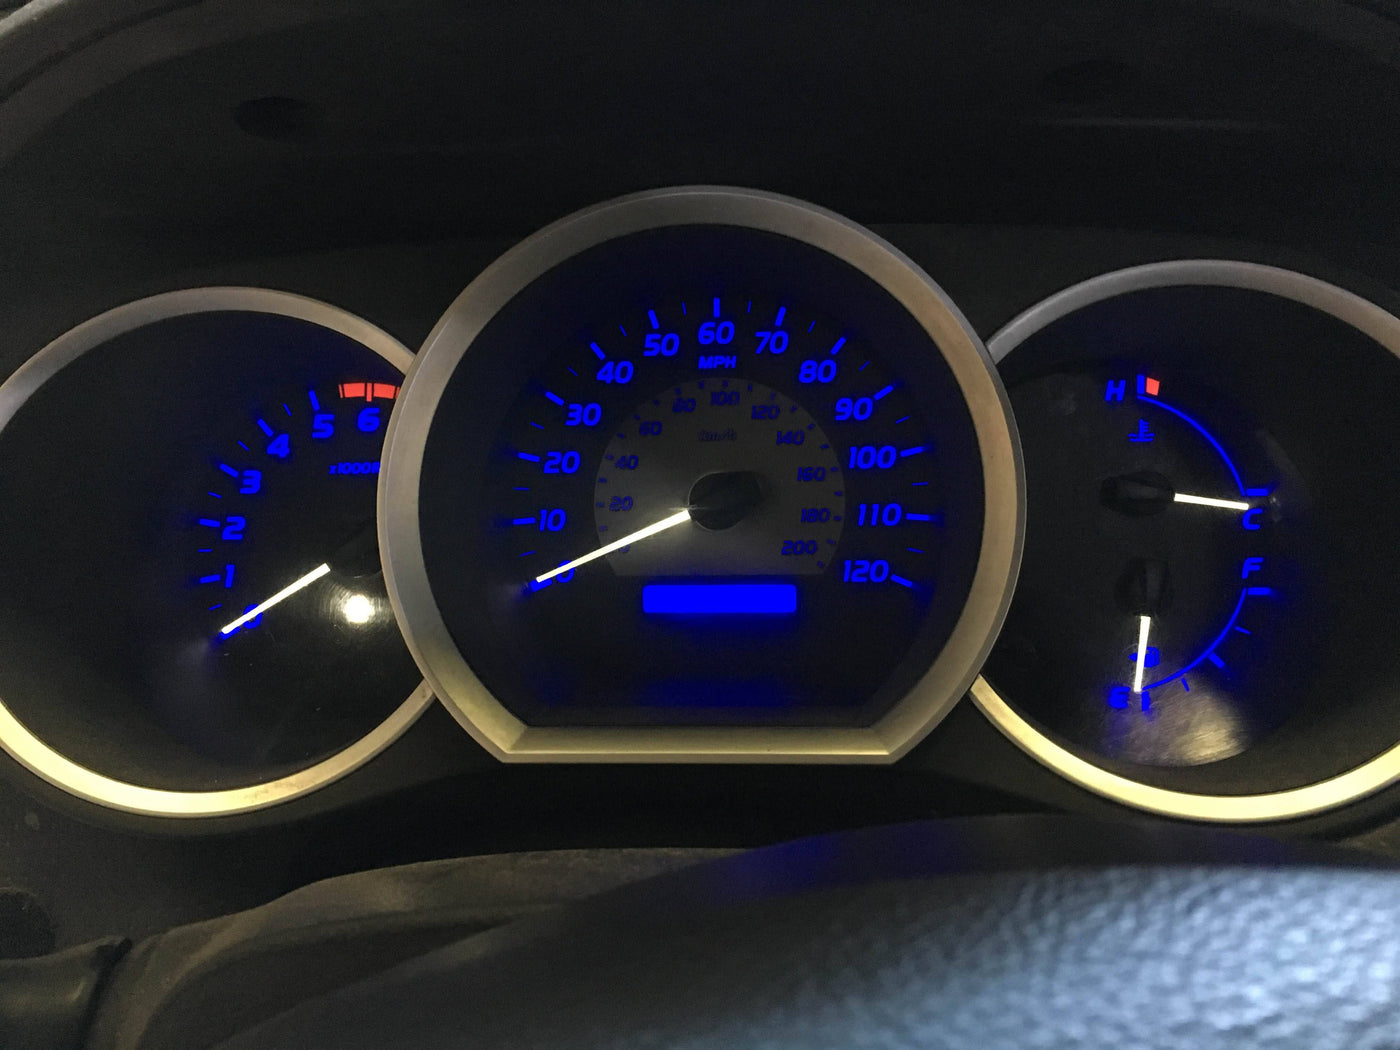 Toyota Tacoma 4Runner Tundra Gauge Cluster Clustom LED Conversion Cluster Repair Service Automotive Circuit Solutions 